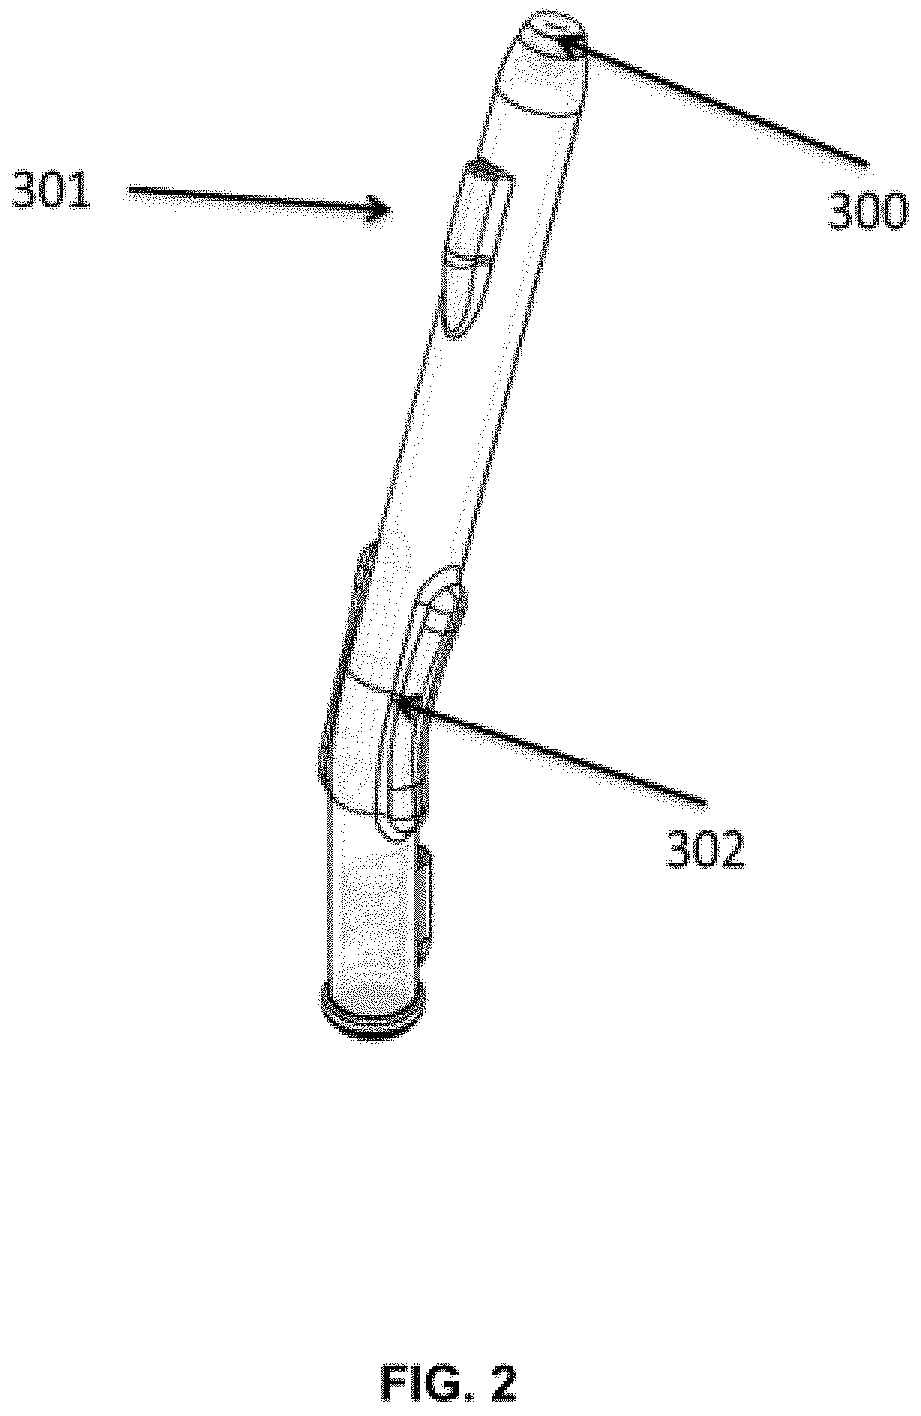 Vacuum-assisted drug delivery device and method